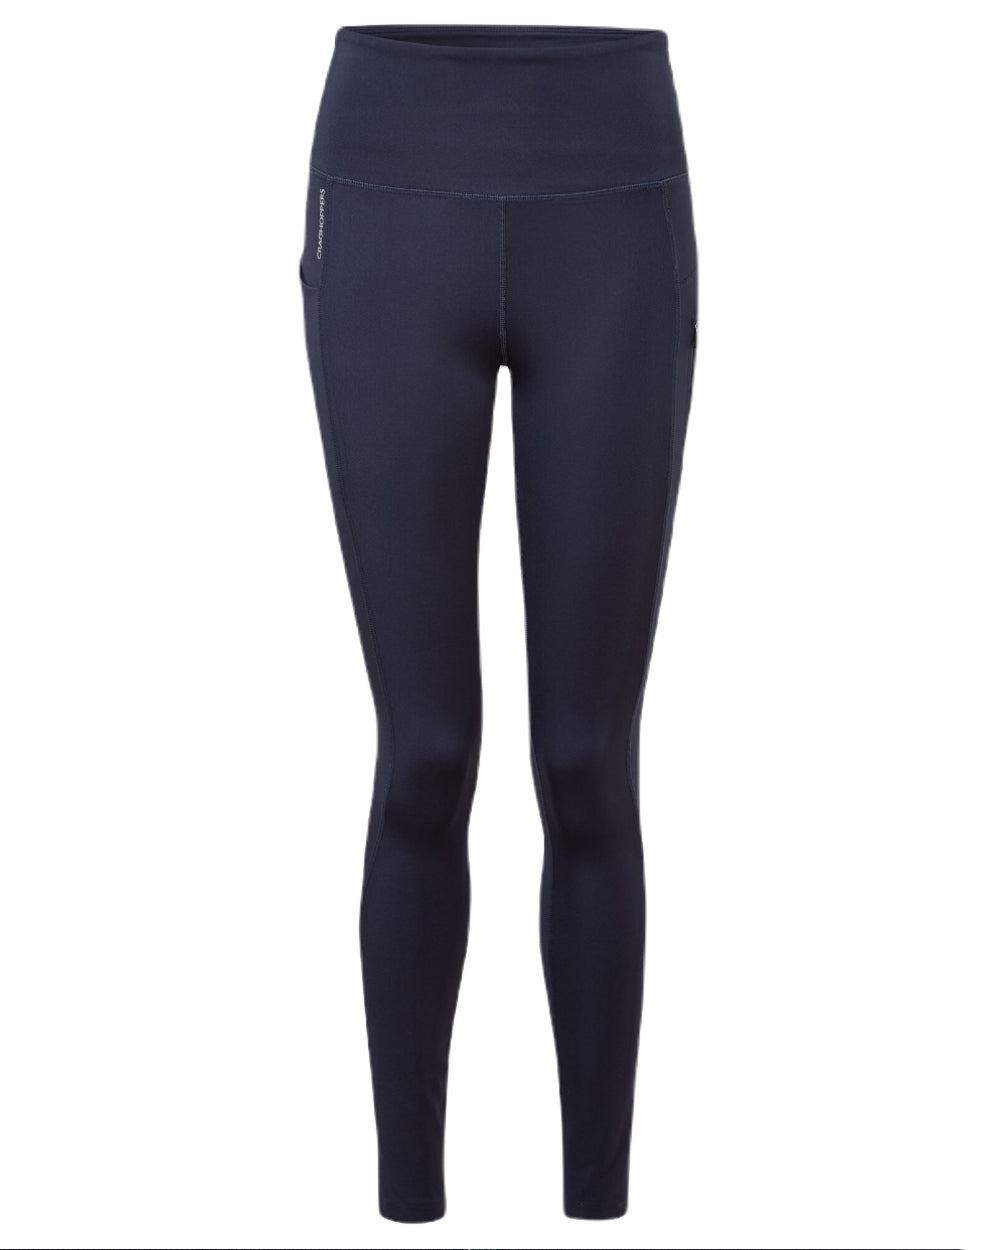 Blue Navy Coloured Craghoppers Womens Kiwi Pro Leggings On A White Background 